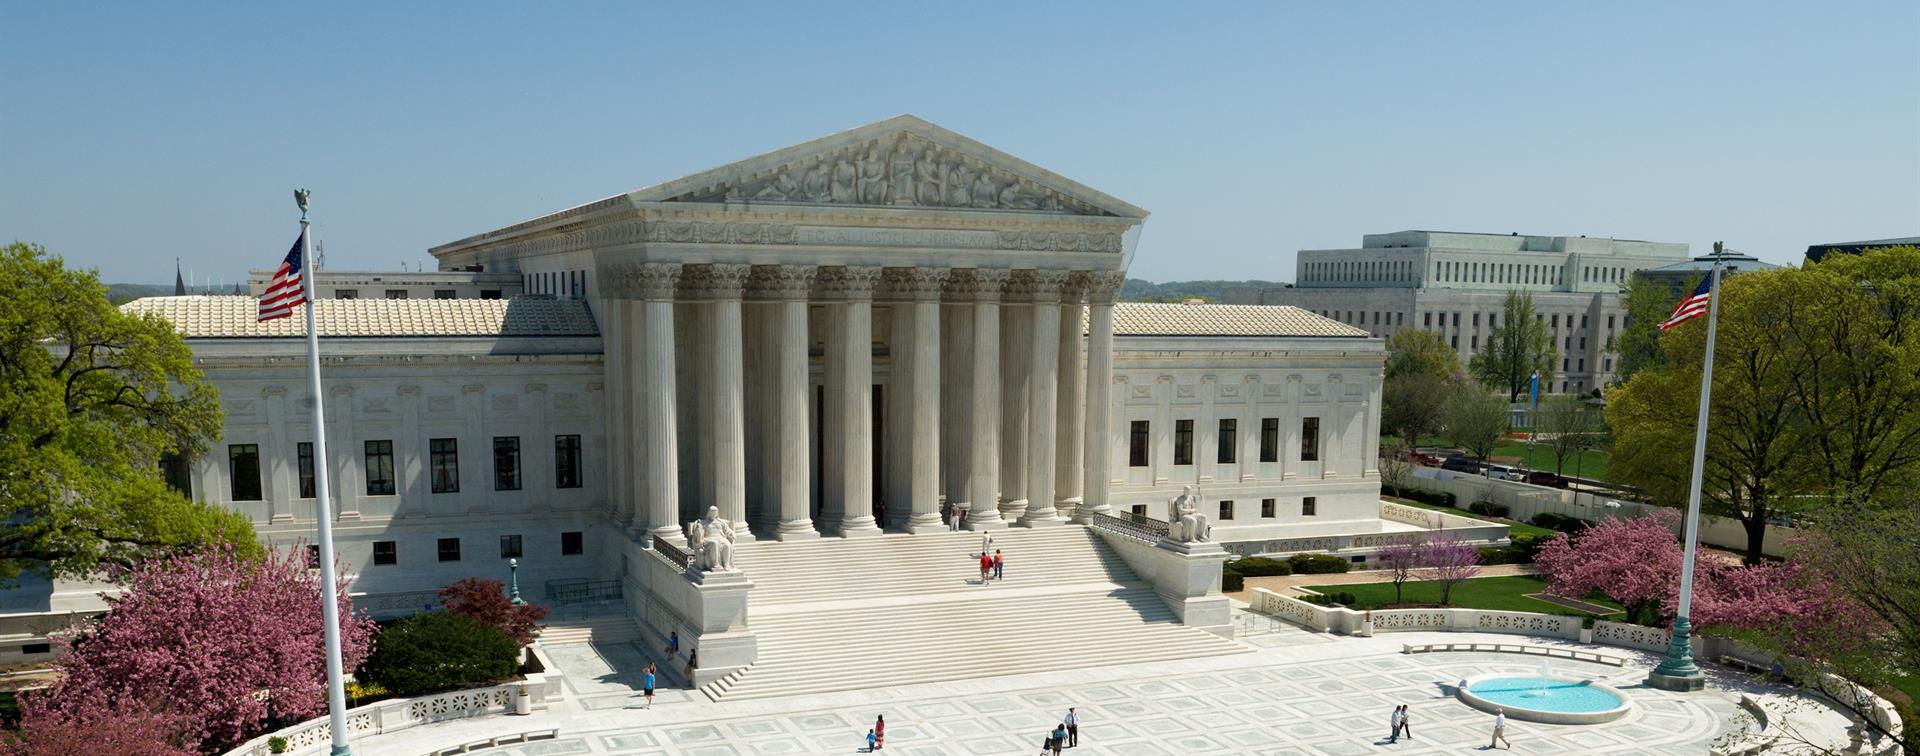 A picture of the US Supreme Court